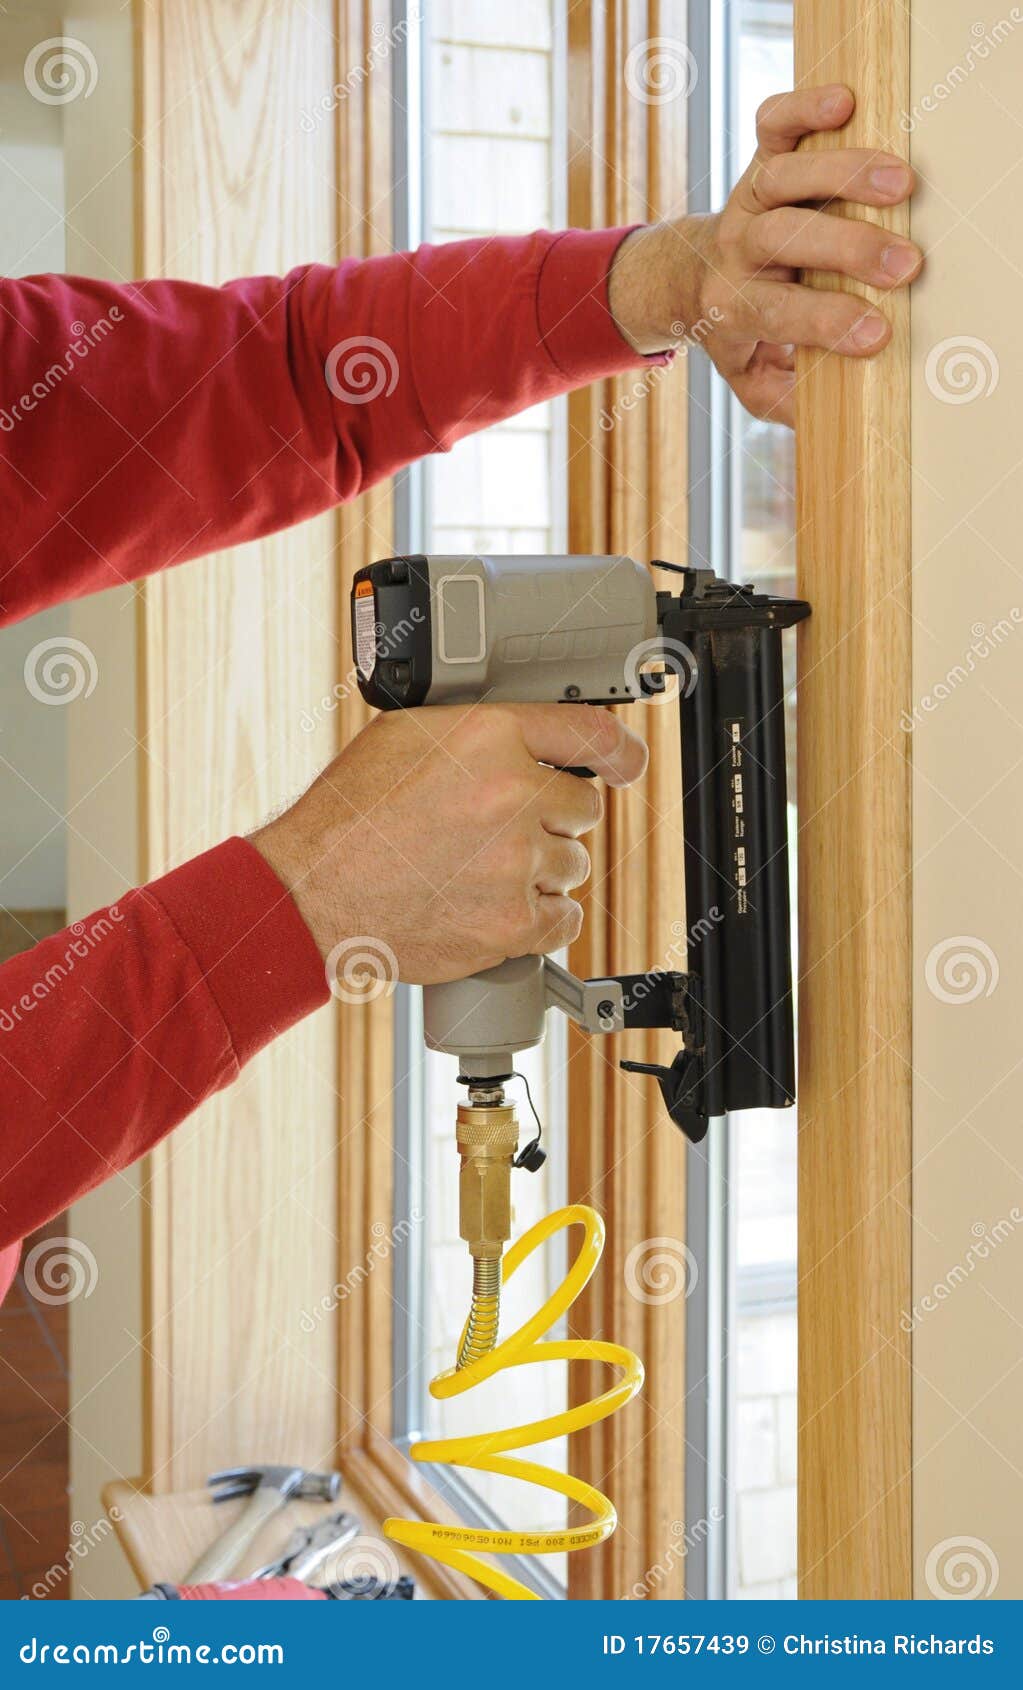 What Nail Guns do you need for Woodworking? — DaileyWoodworks.School